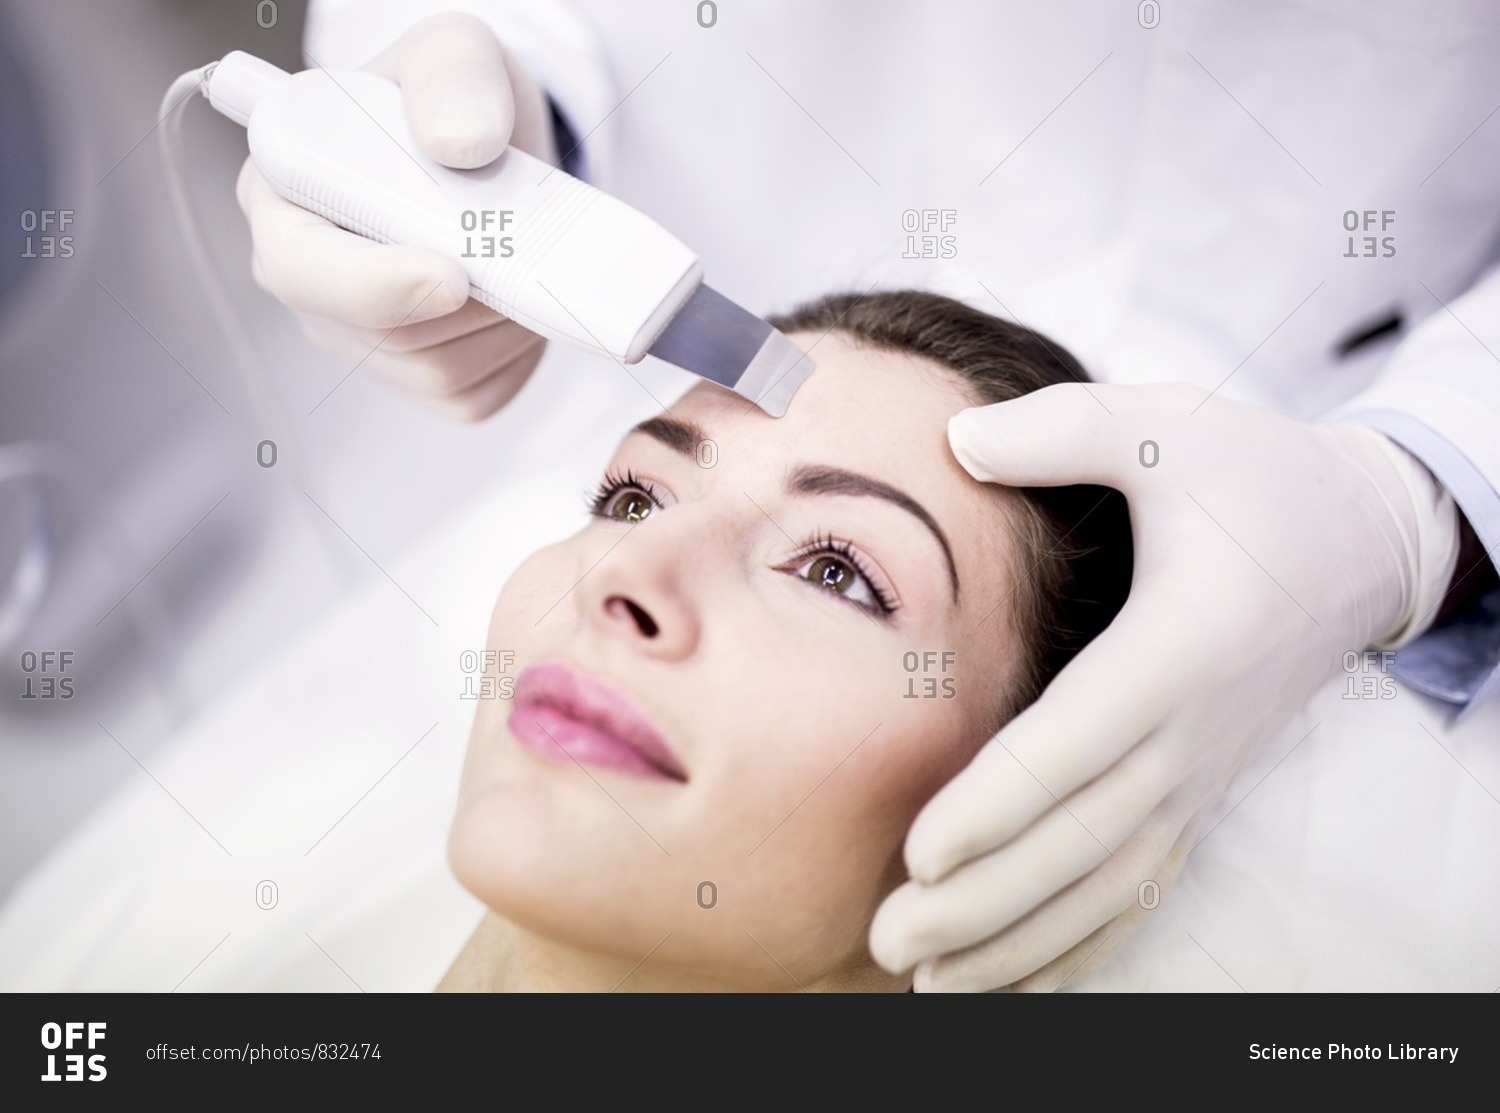 Young woman receiving facial microdermabrasion treatment in clinic, close-up. The cosmetic procedure uses micro crystals to remove dead skin cells. This exfoliating treatment can stimulate the production of collagen and help improve fine lines and acne sc